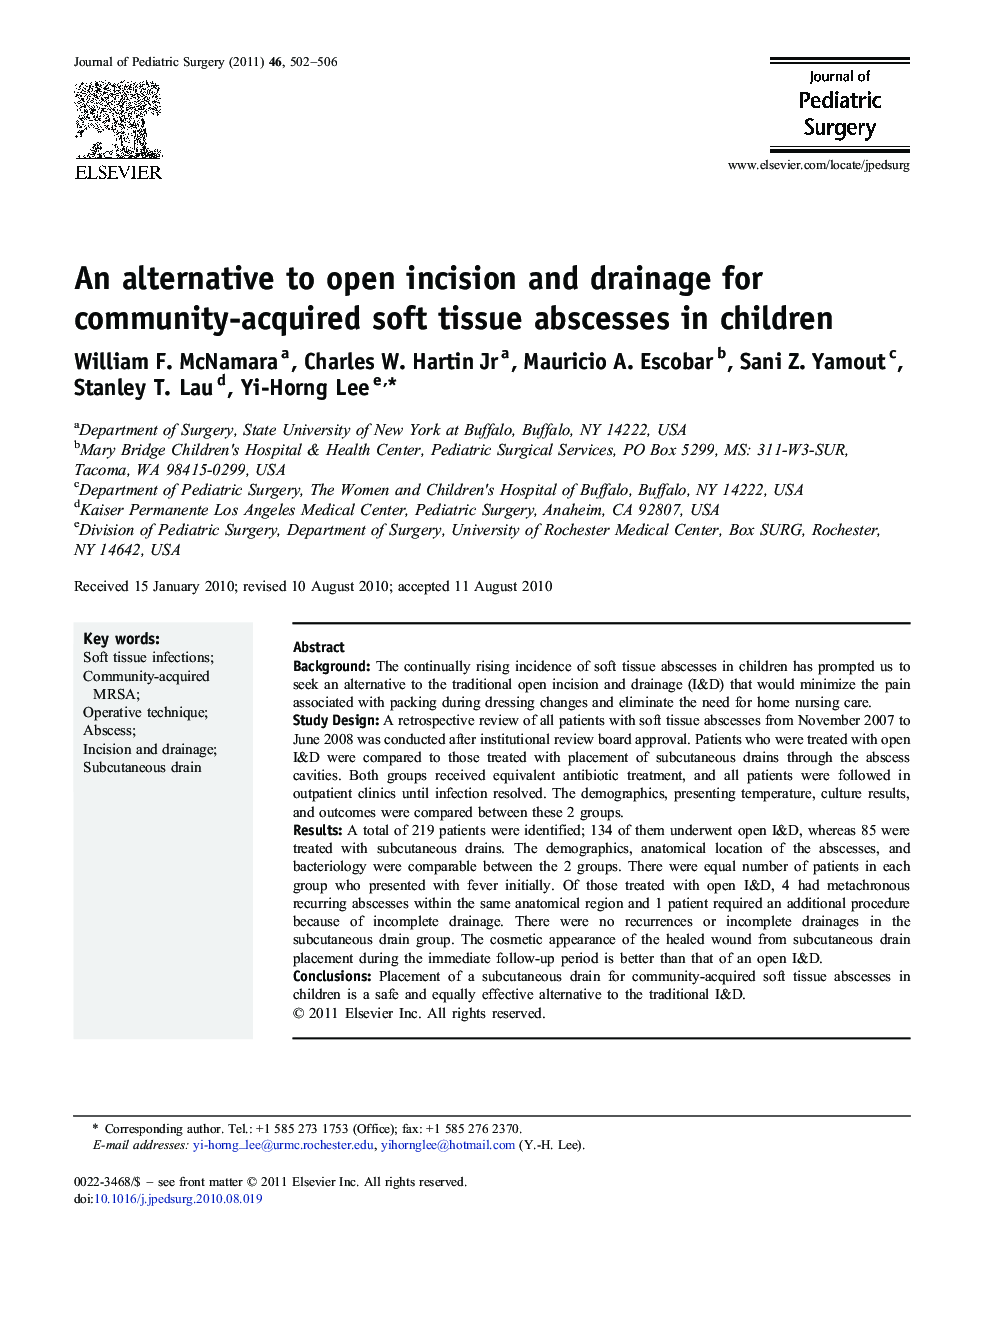 An alternative to open incision and drainage for community-acquired soft tissue abscesses in children